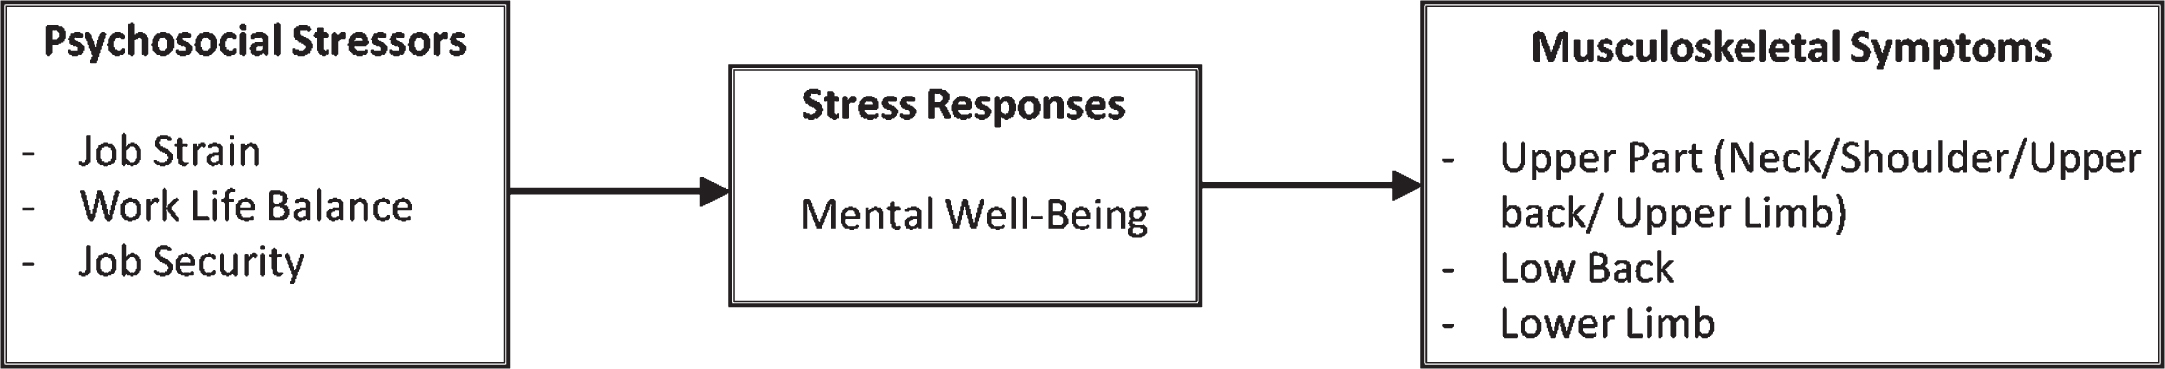 Conceptual model linking between psychosocial stressors and musculoskeletal symptoms through psychological well-being.